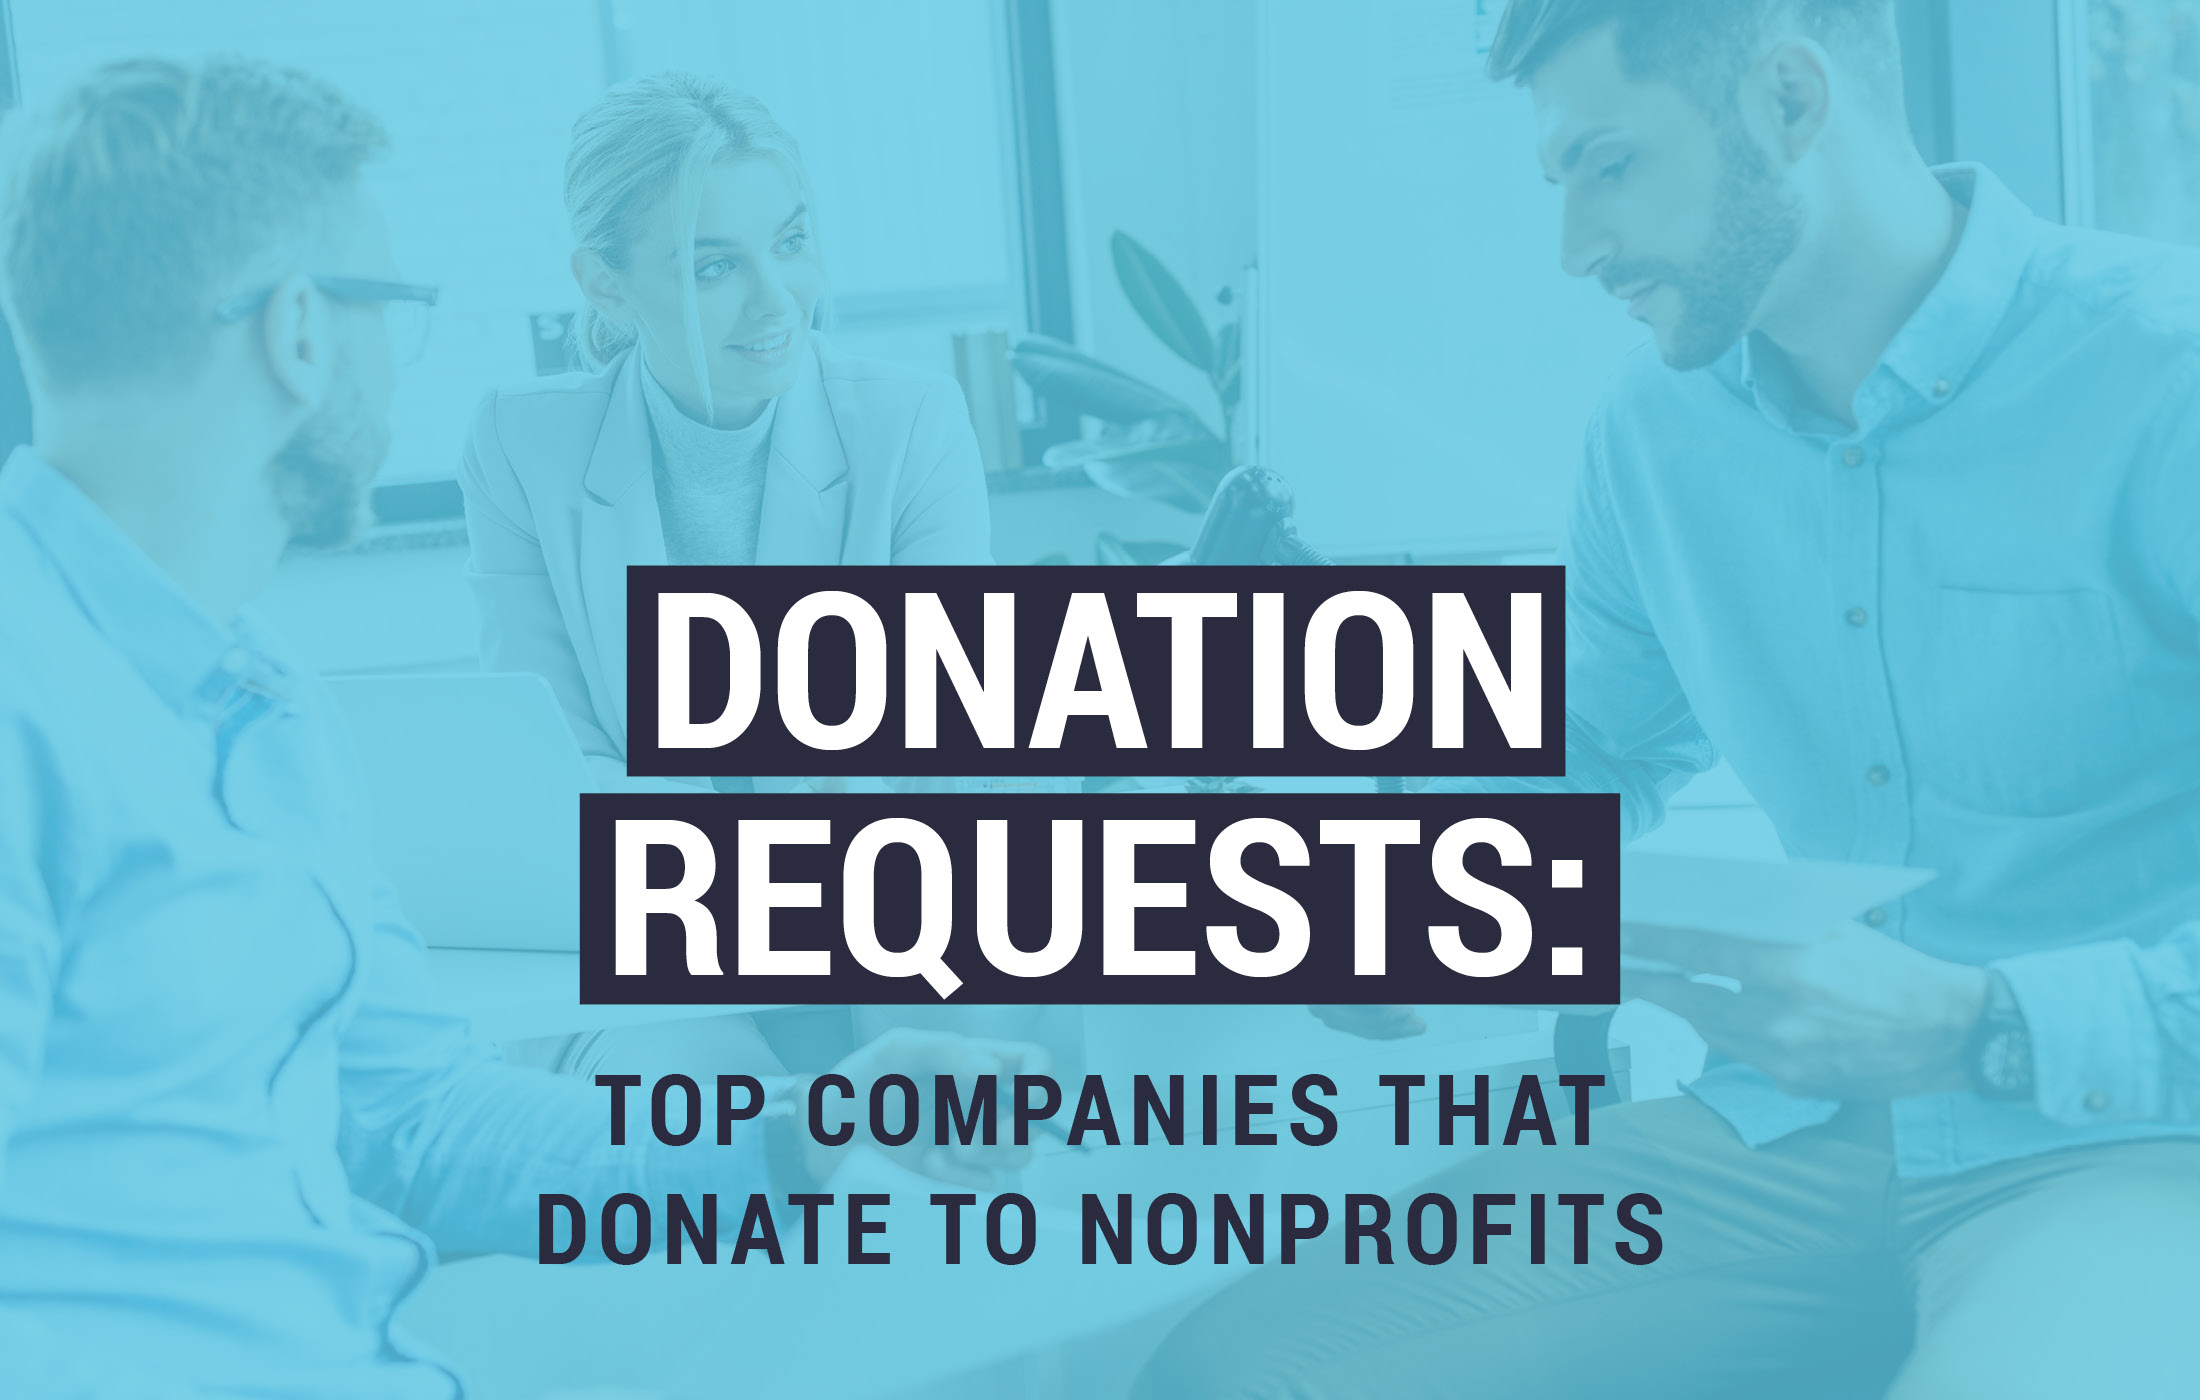 https://blog.fundly.com/wp-content/uploads/2021/04/Donation-Request_Feature.jpg